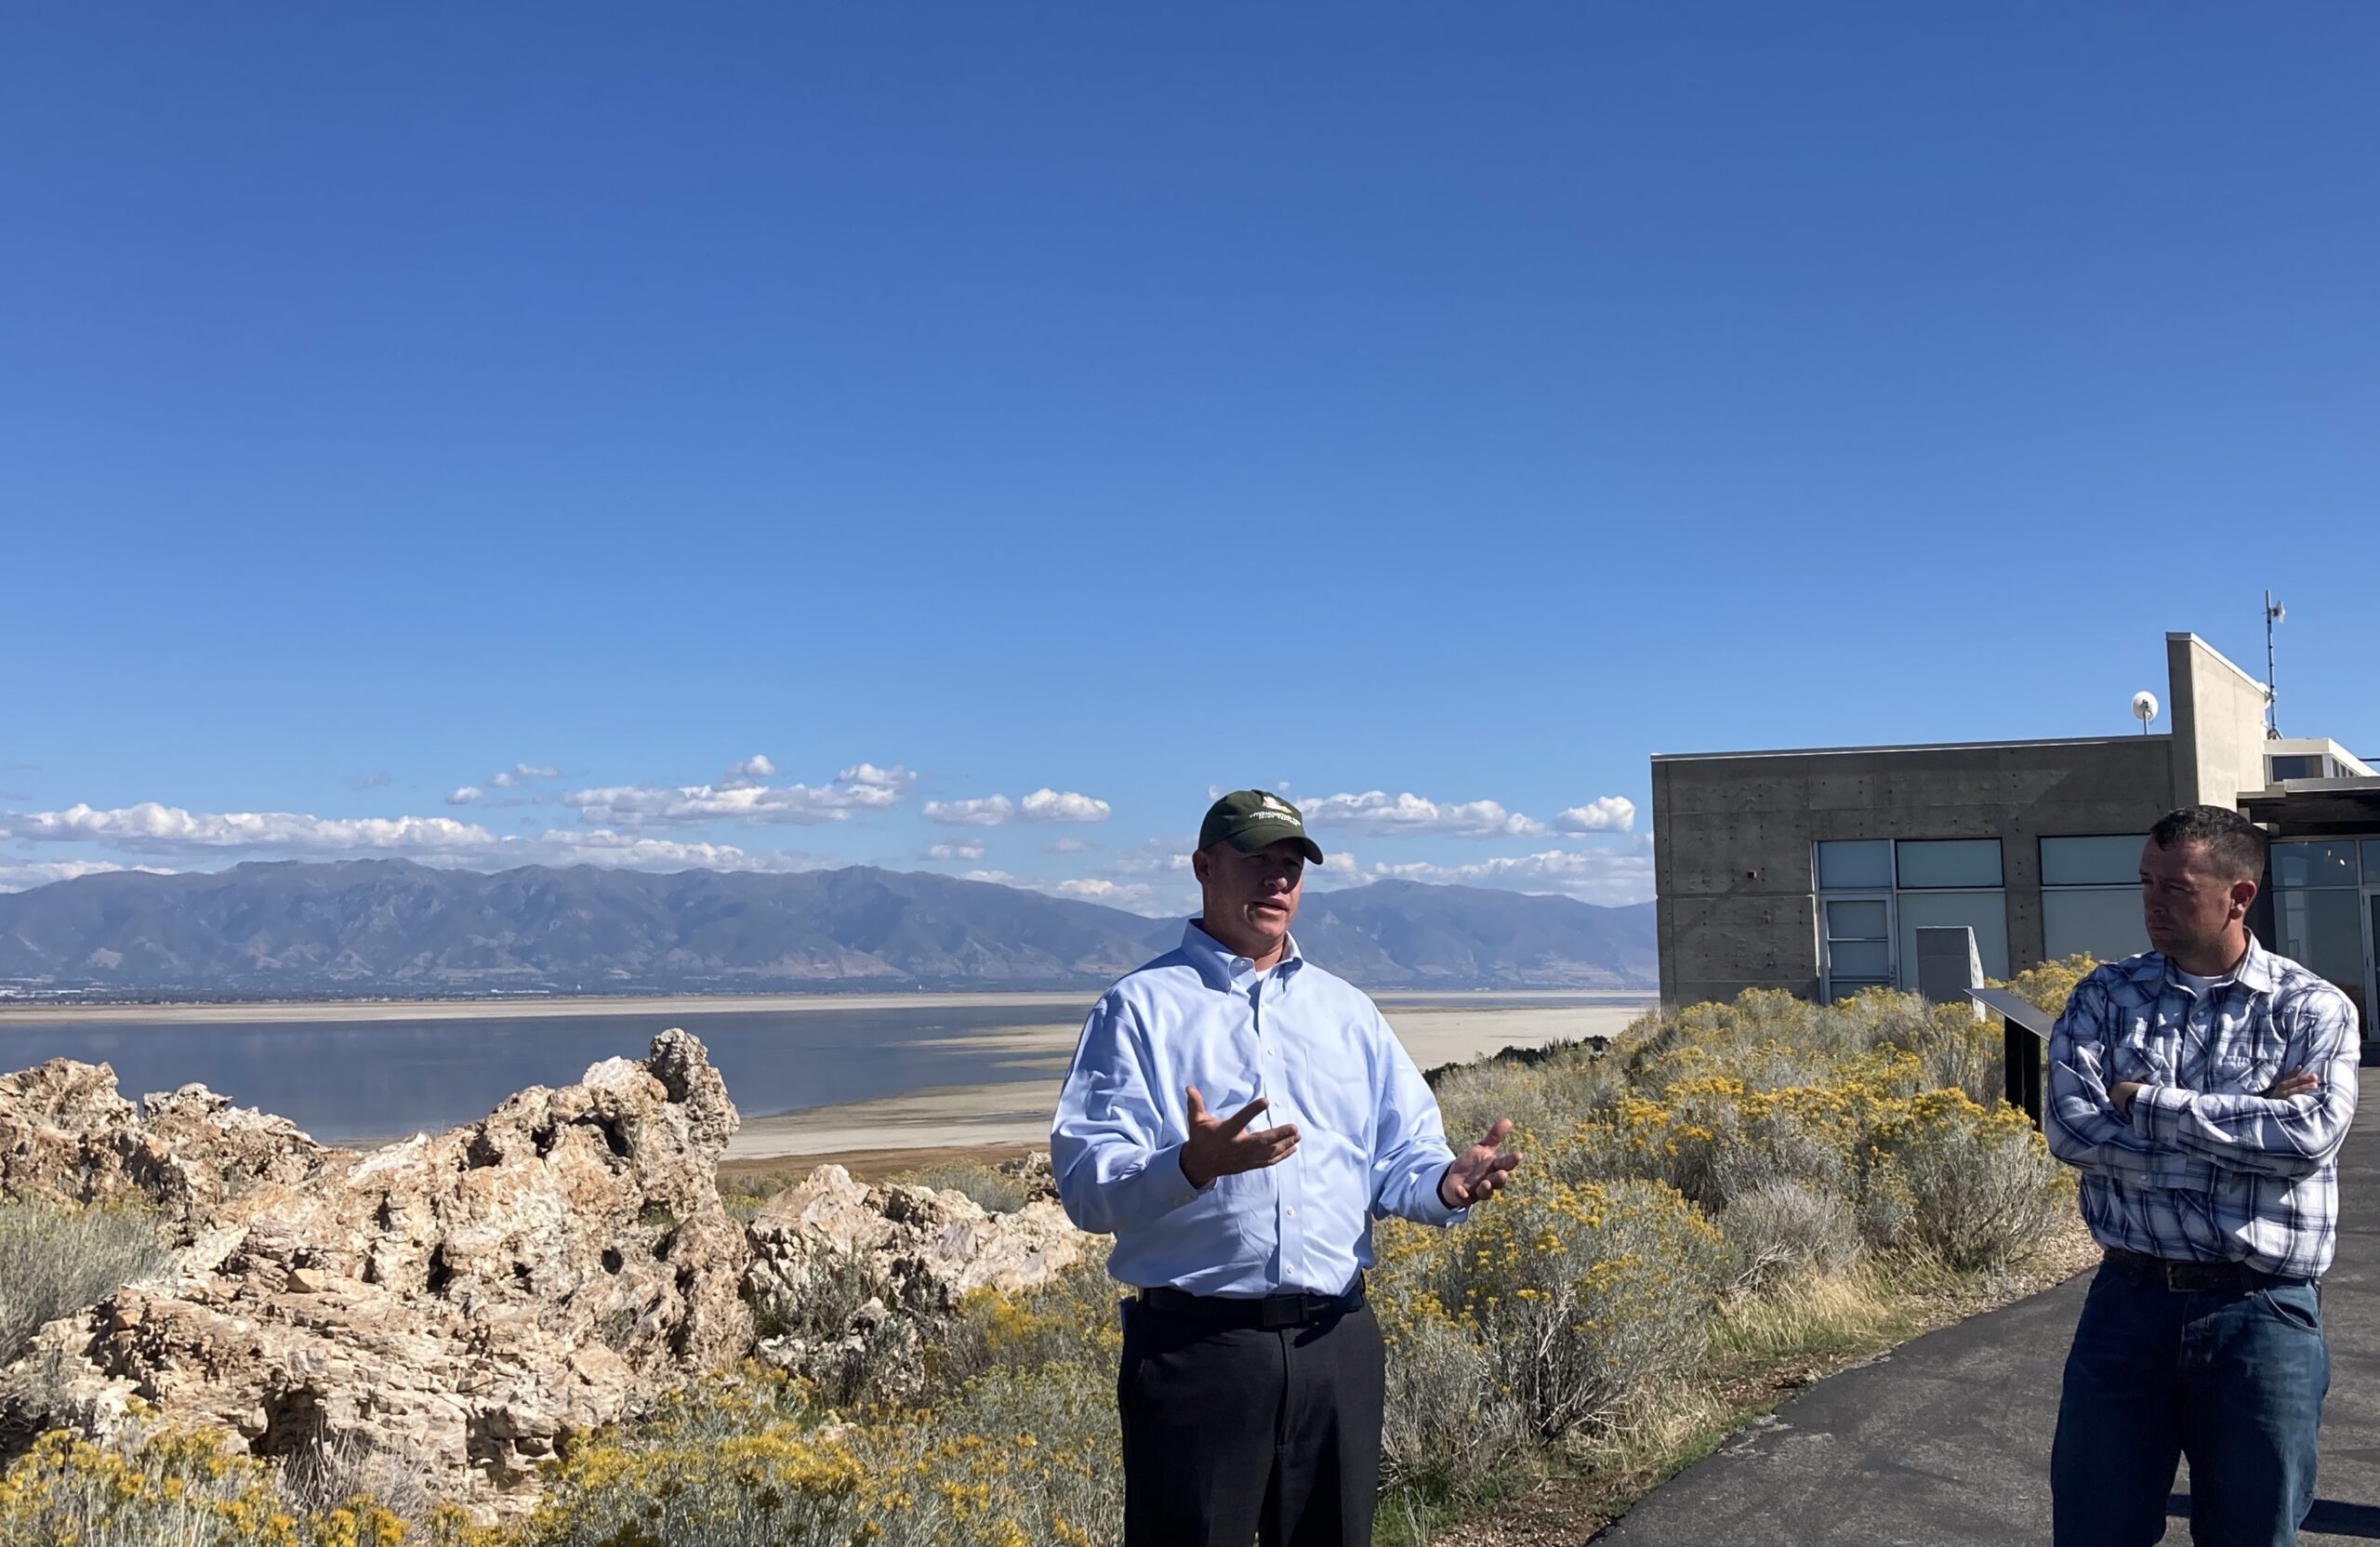 Joel Ferry speaks to a group at Antelope Island about water conservation. The lake is in the background with mountains.